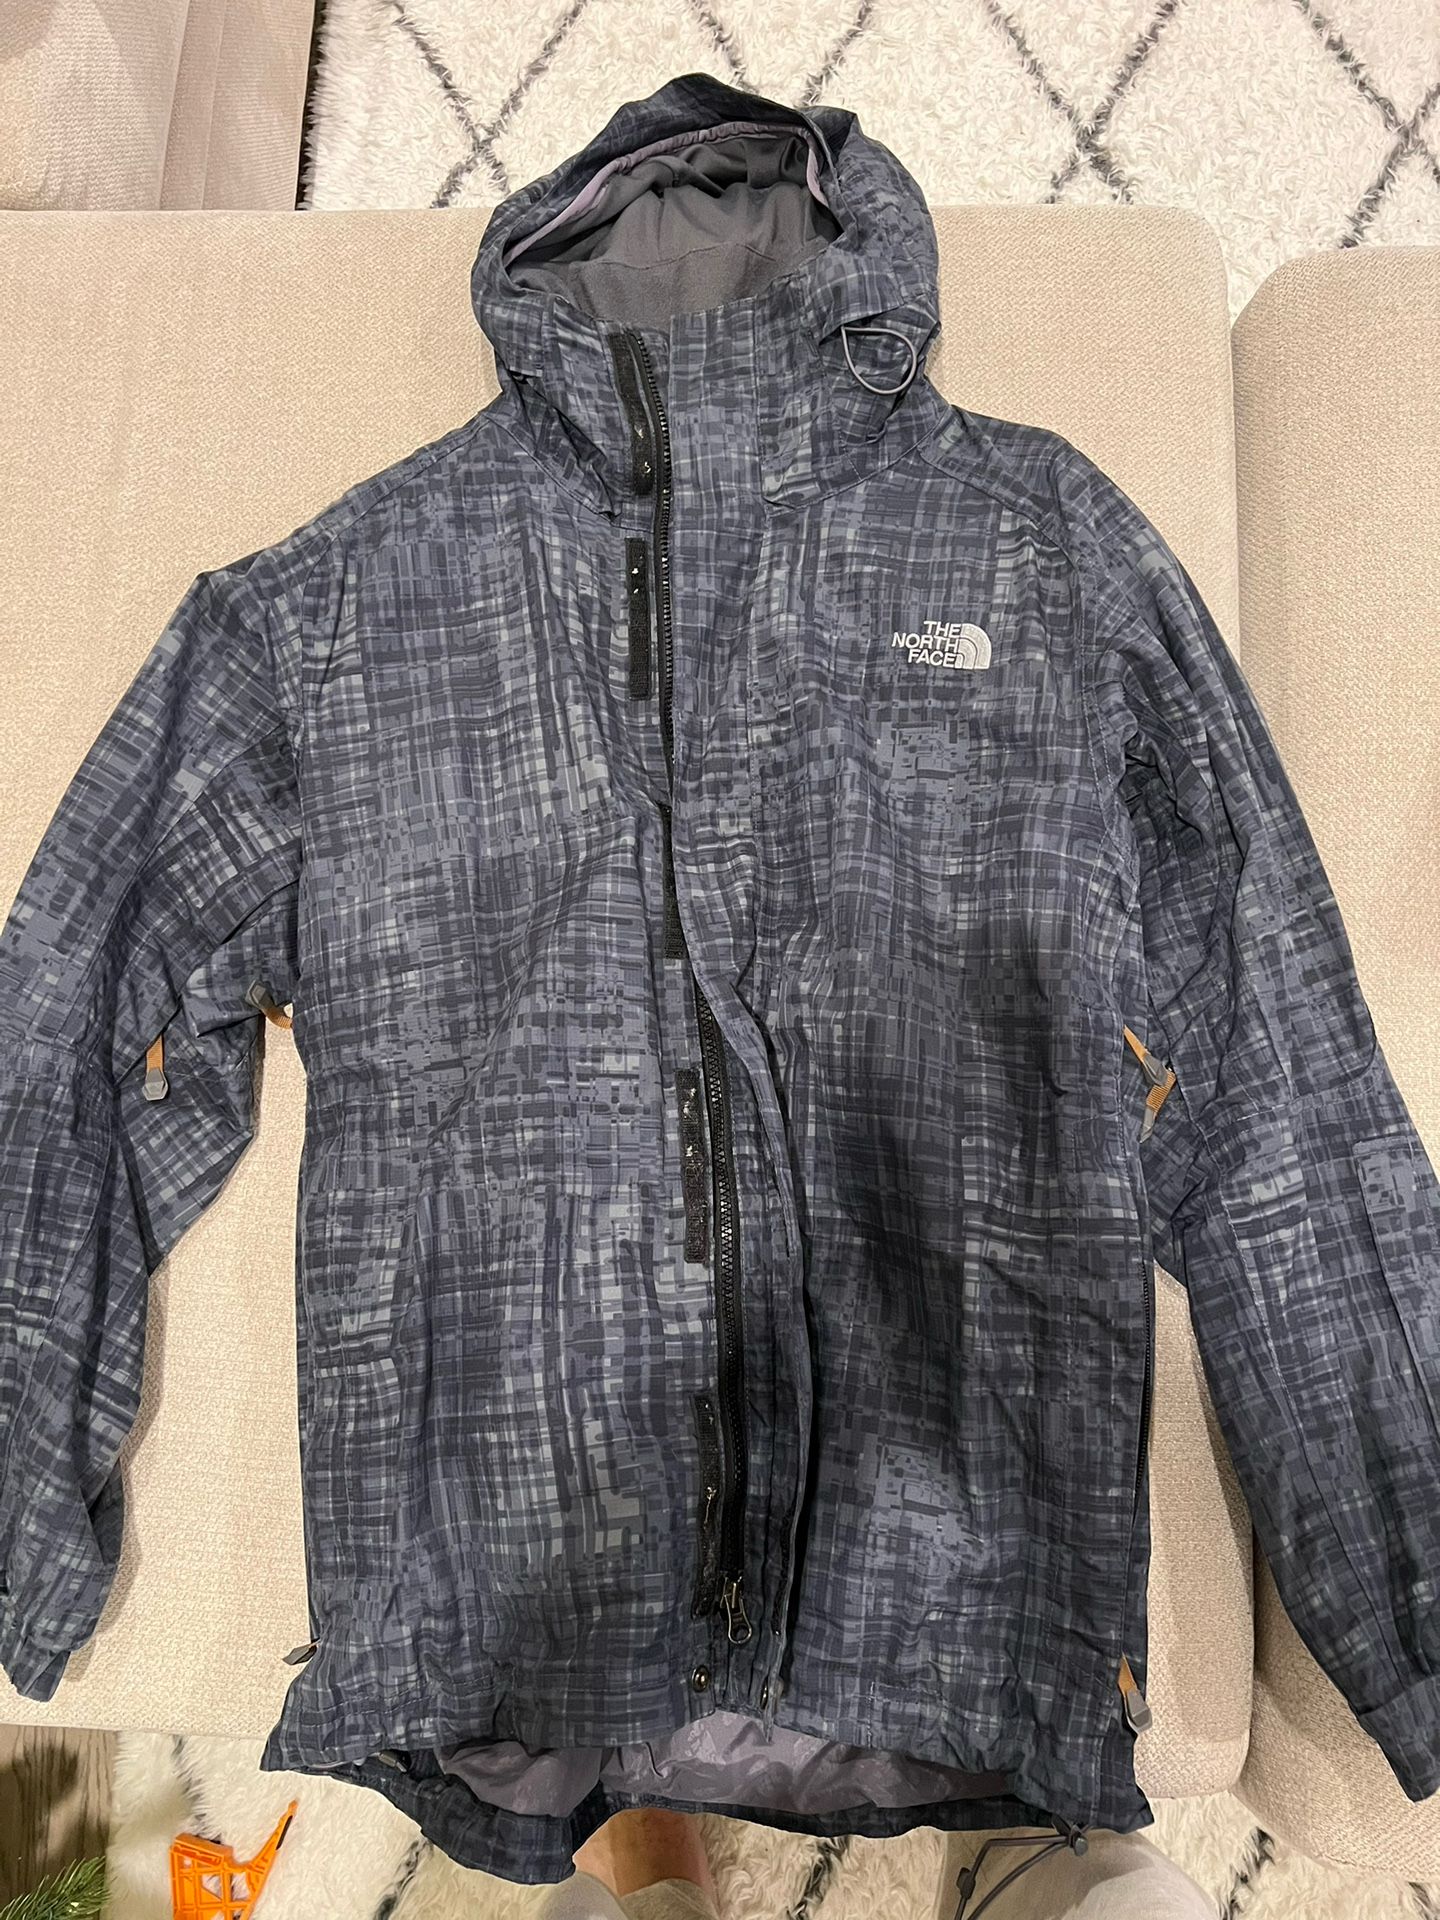 THE NORTH FACE DIGITAL CAMO HYVENT JACKET